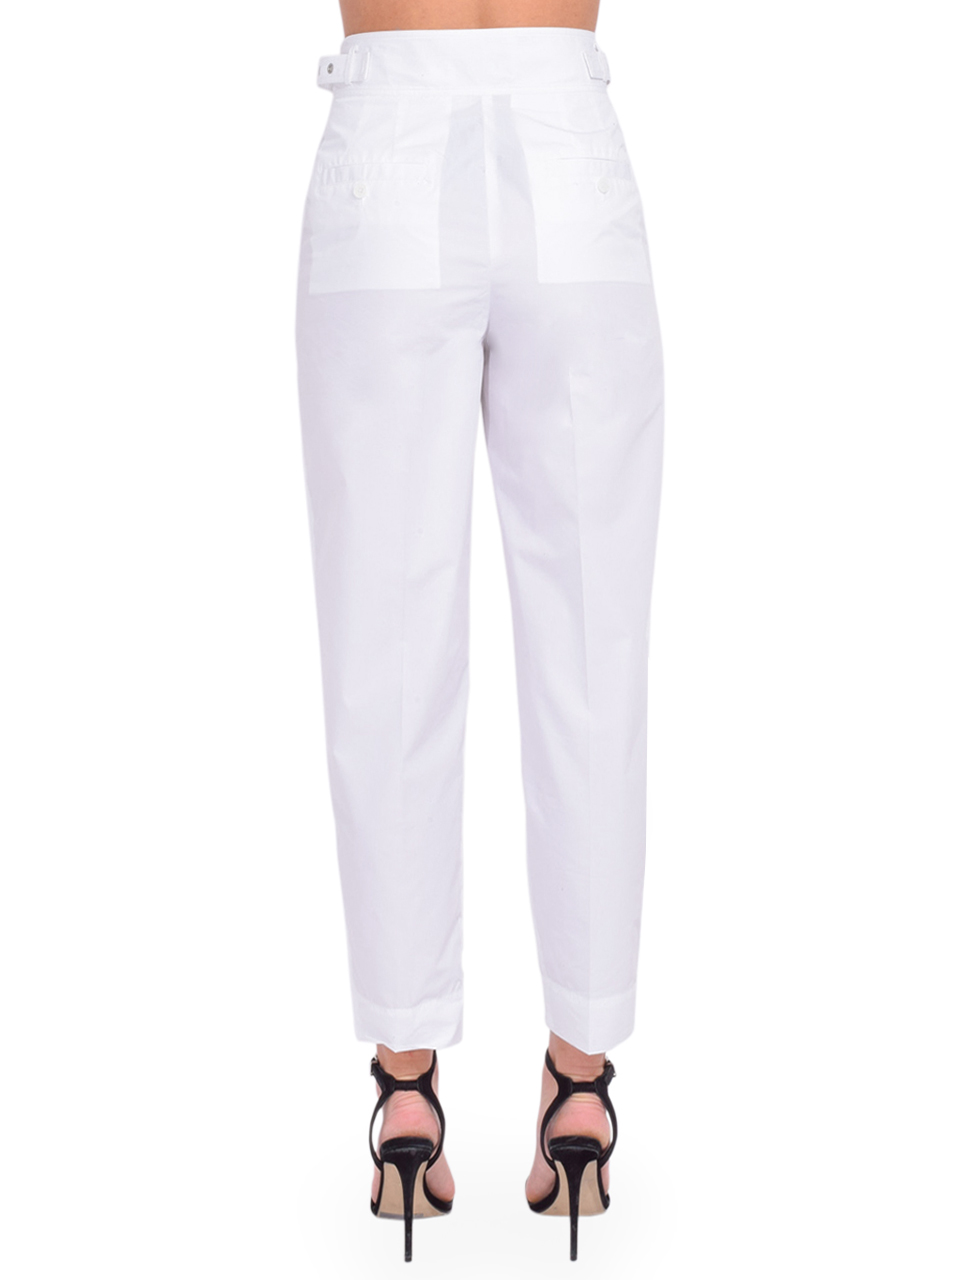 3.1 Phillip Lim Buckle Waistband Trouser in White Back View 